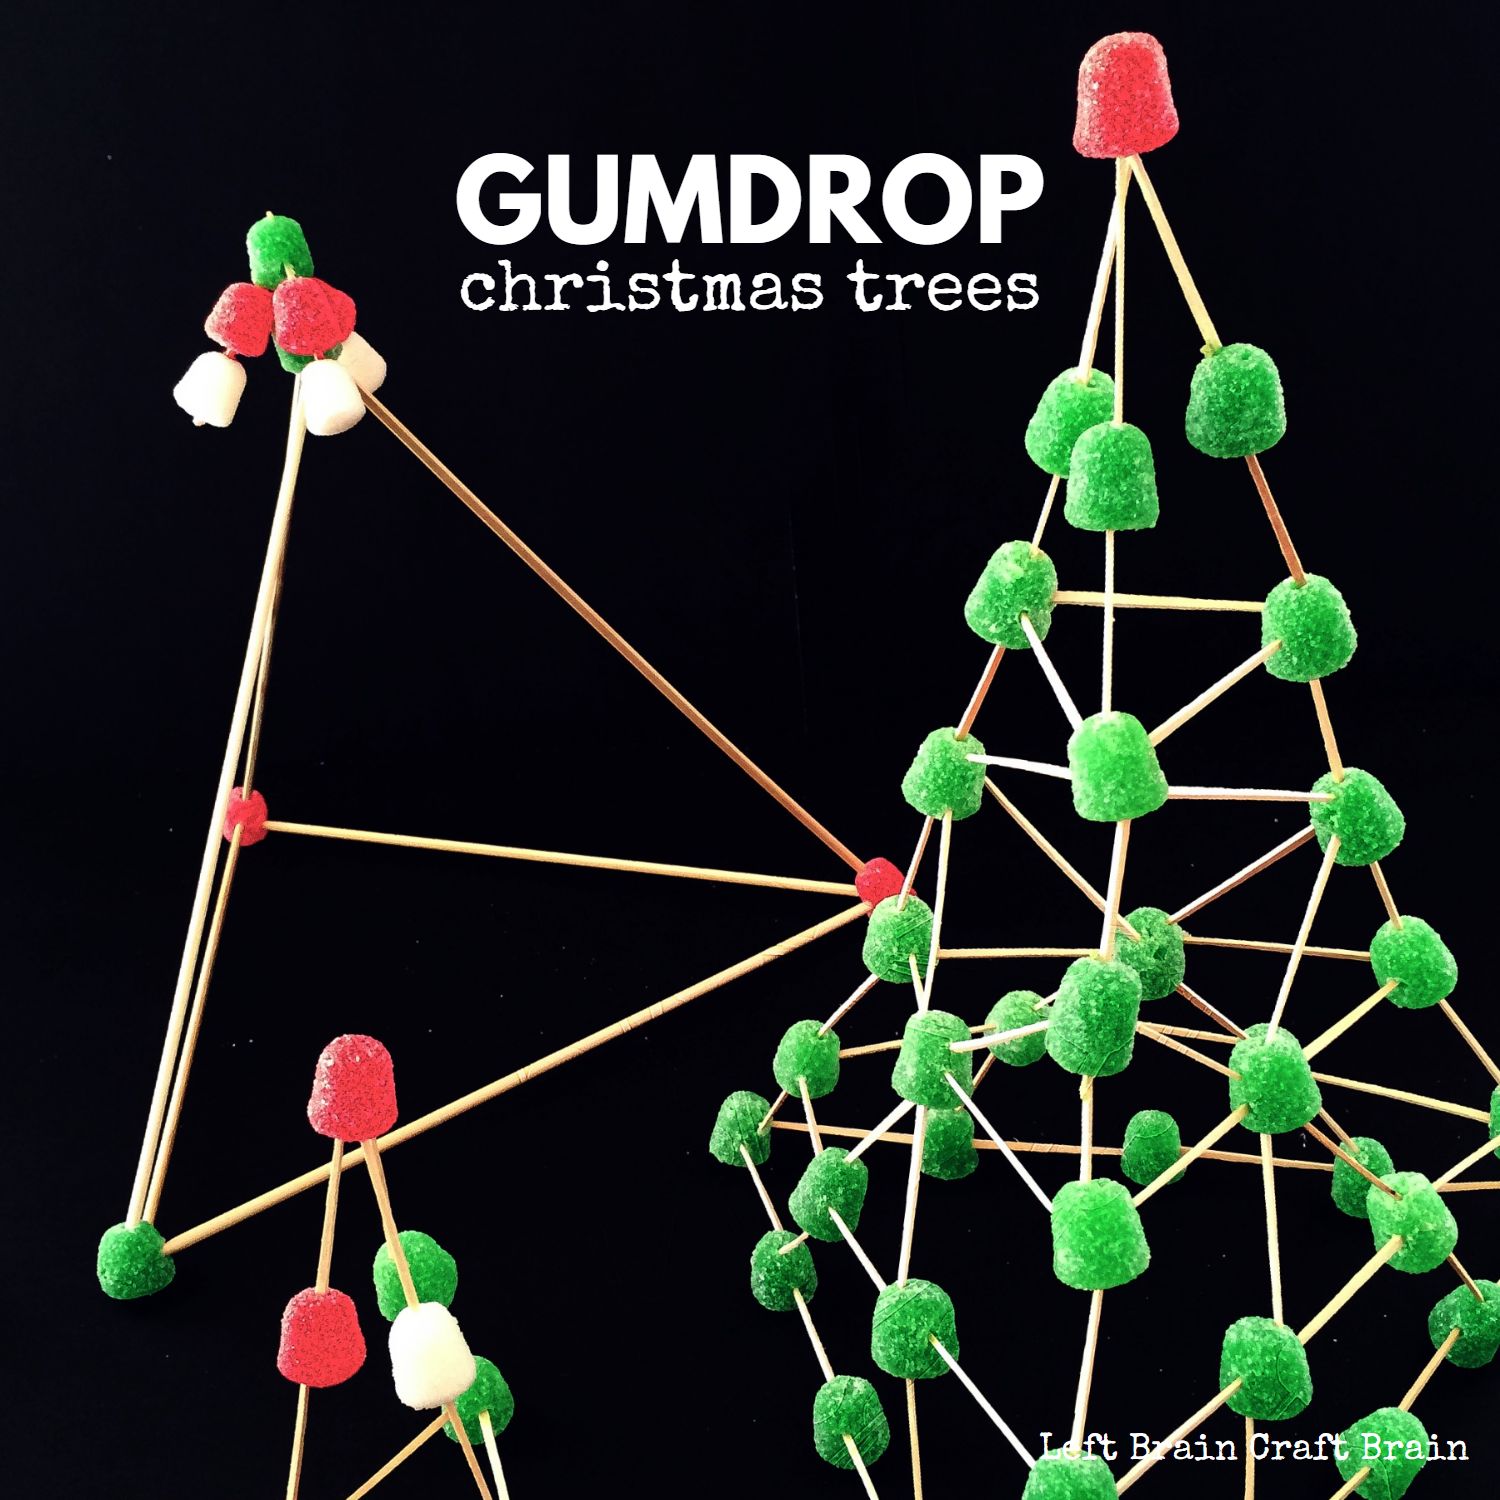 Building gumdrop Christmas trees is a fun and festive way to play architect. Perfect for building STEM skills.